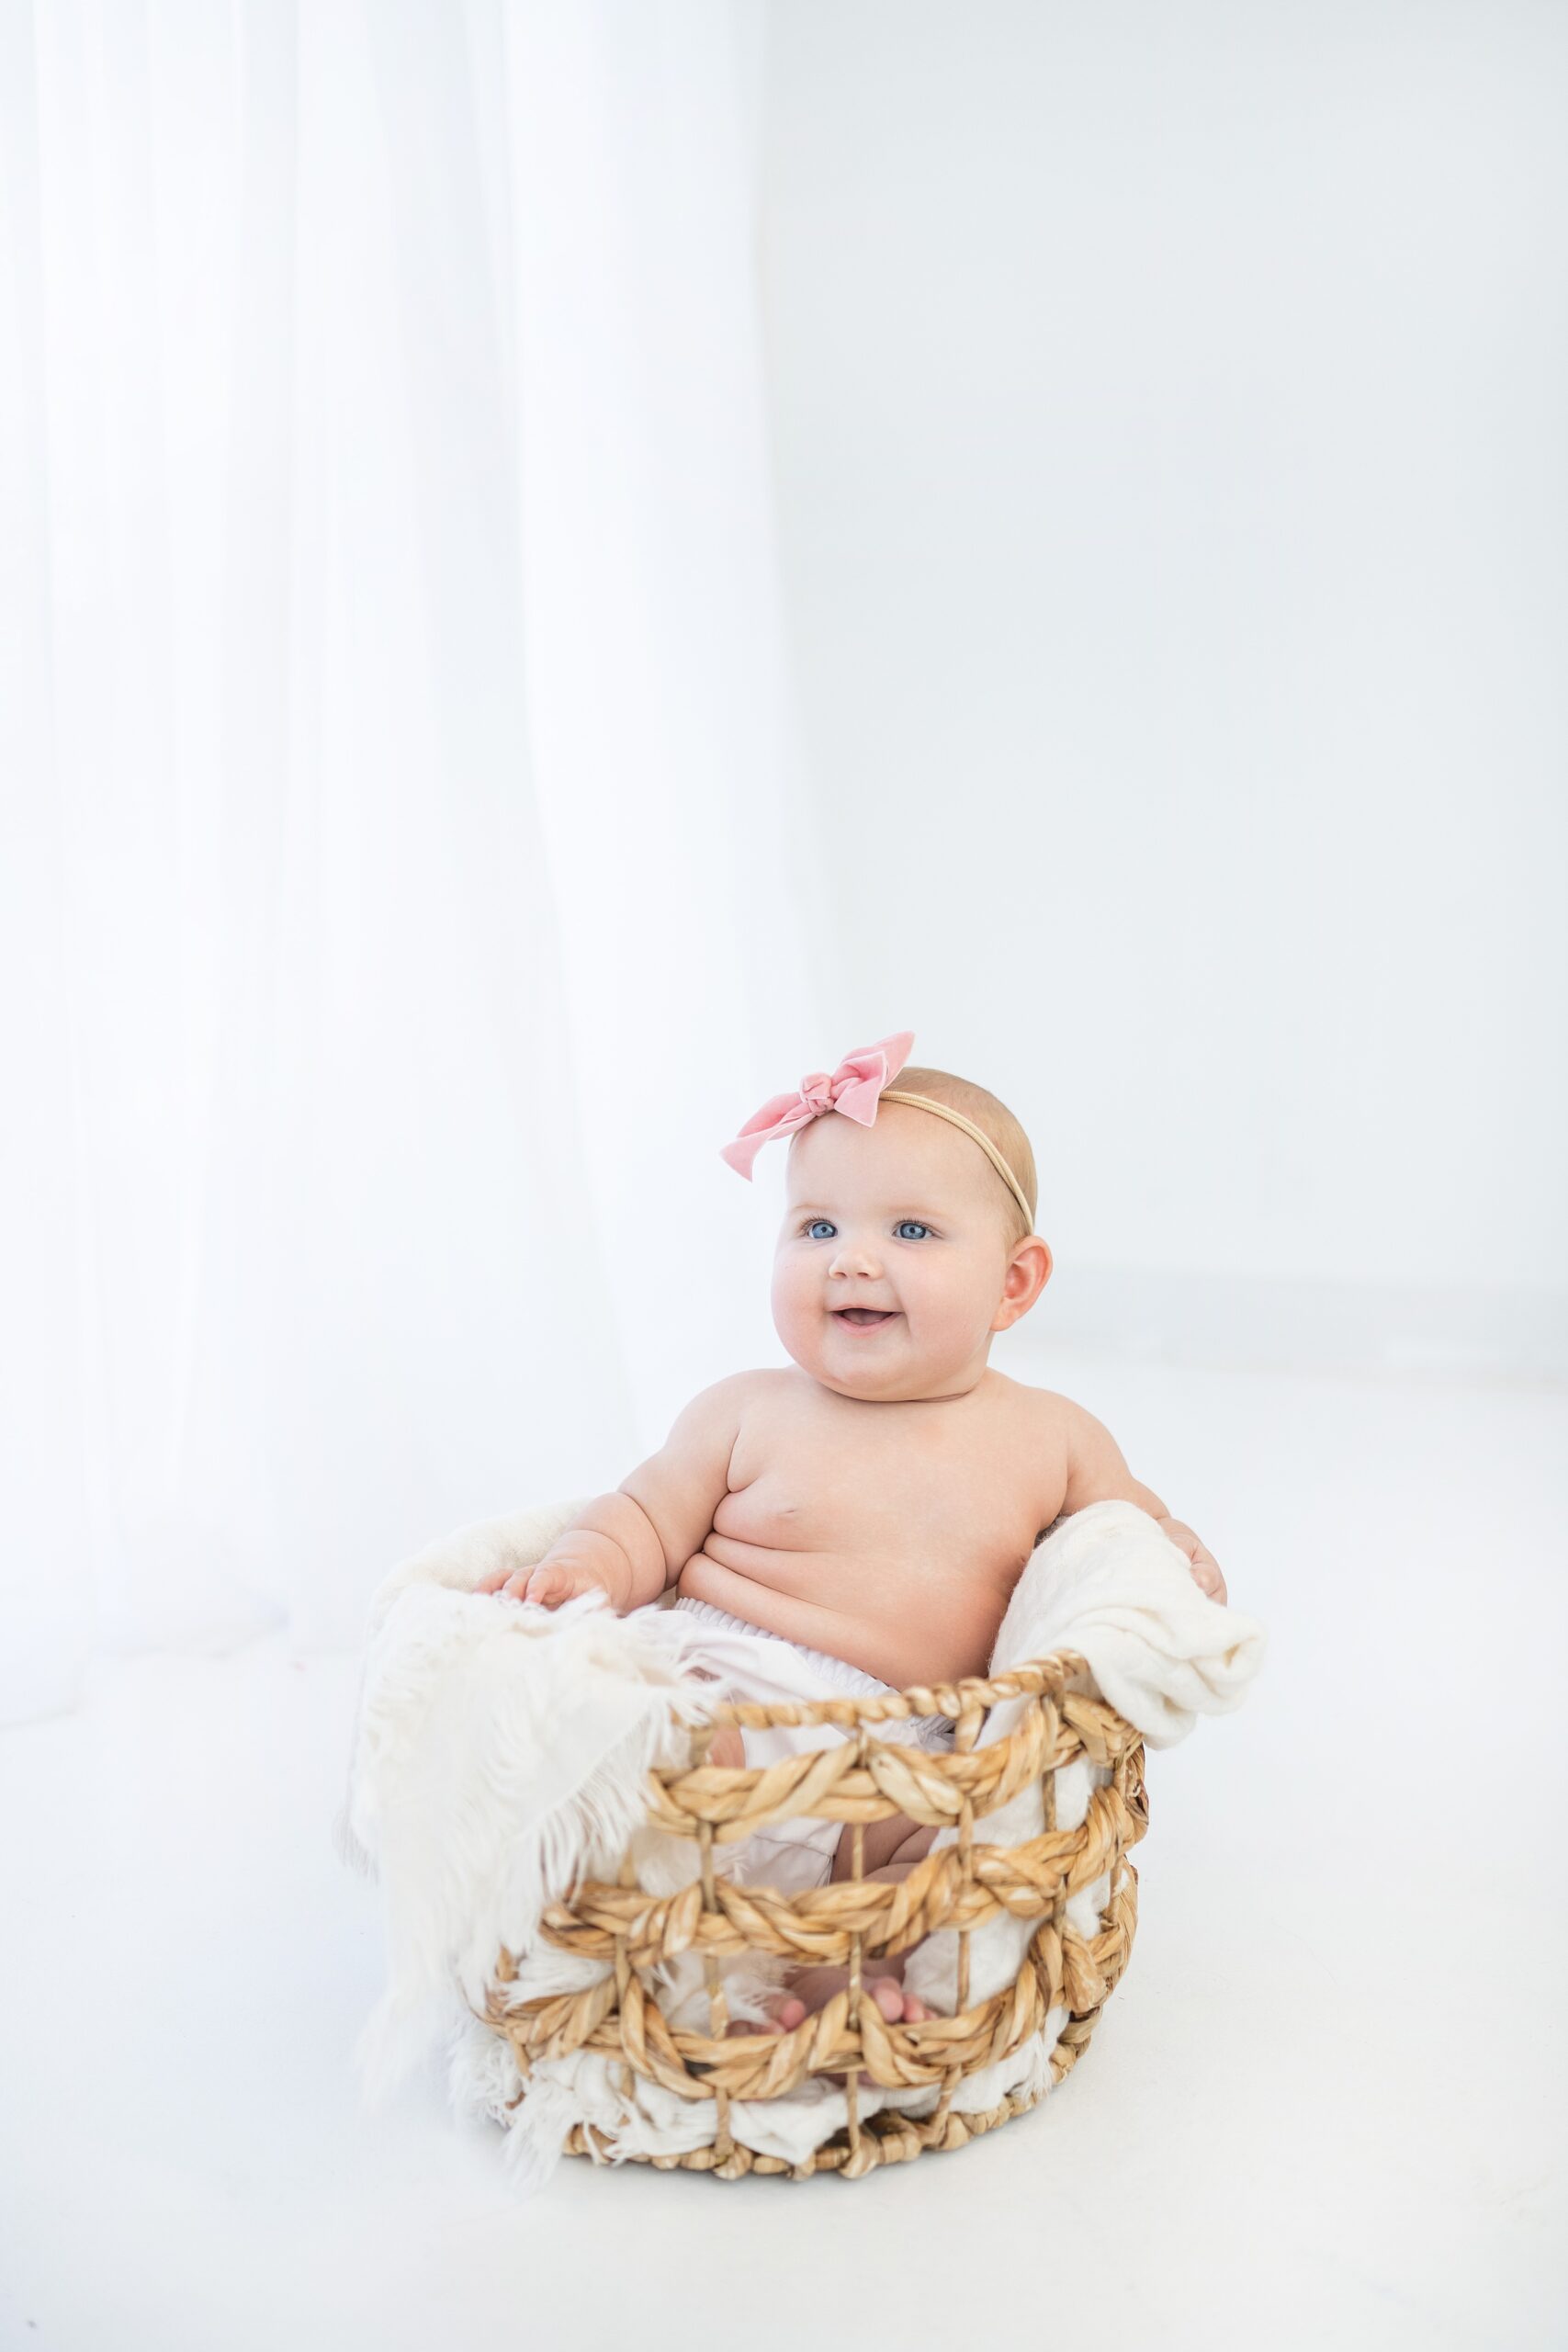 An infant baby with a pink bow sits in a woven basket with a white blanket in a studio natural okie baby